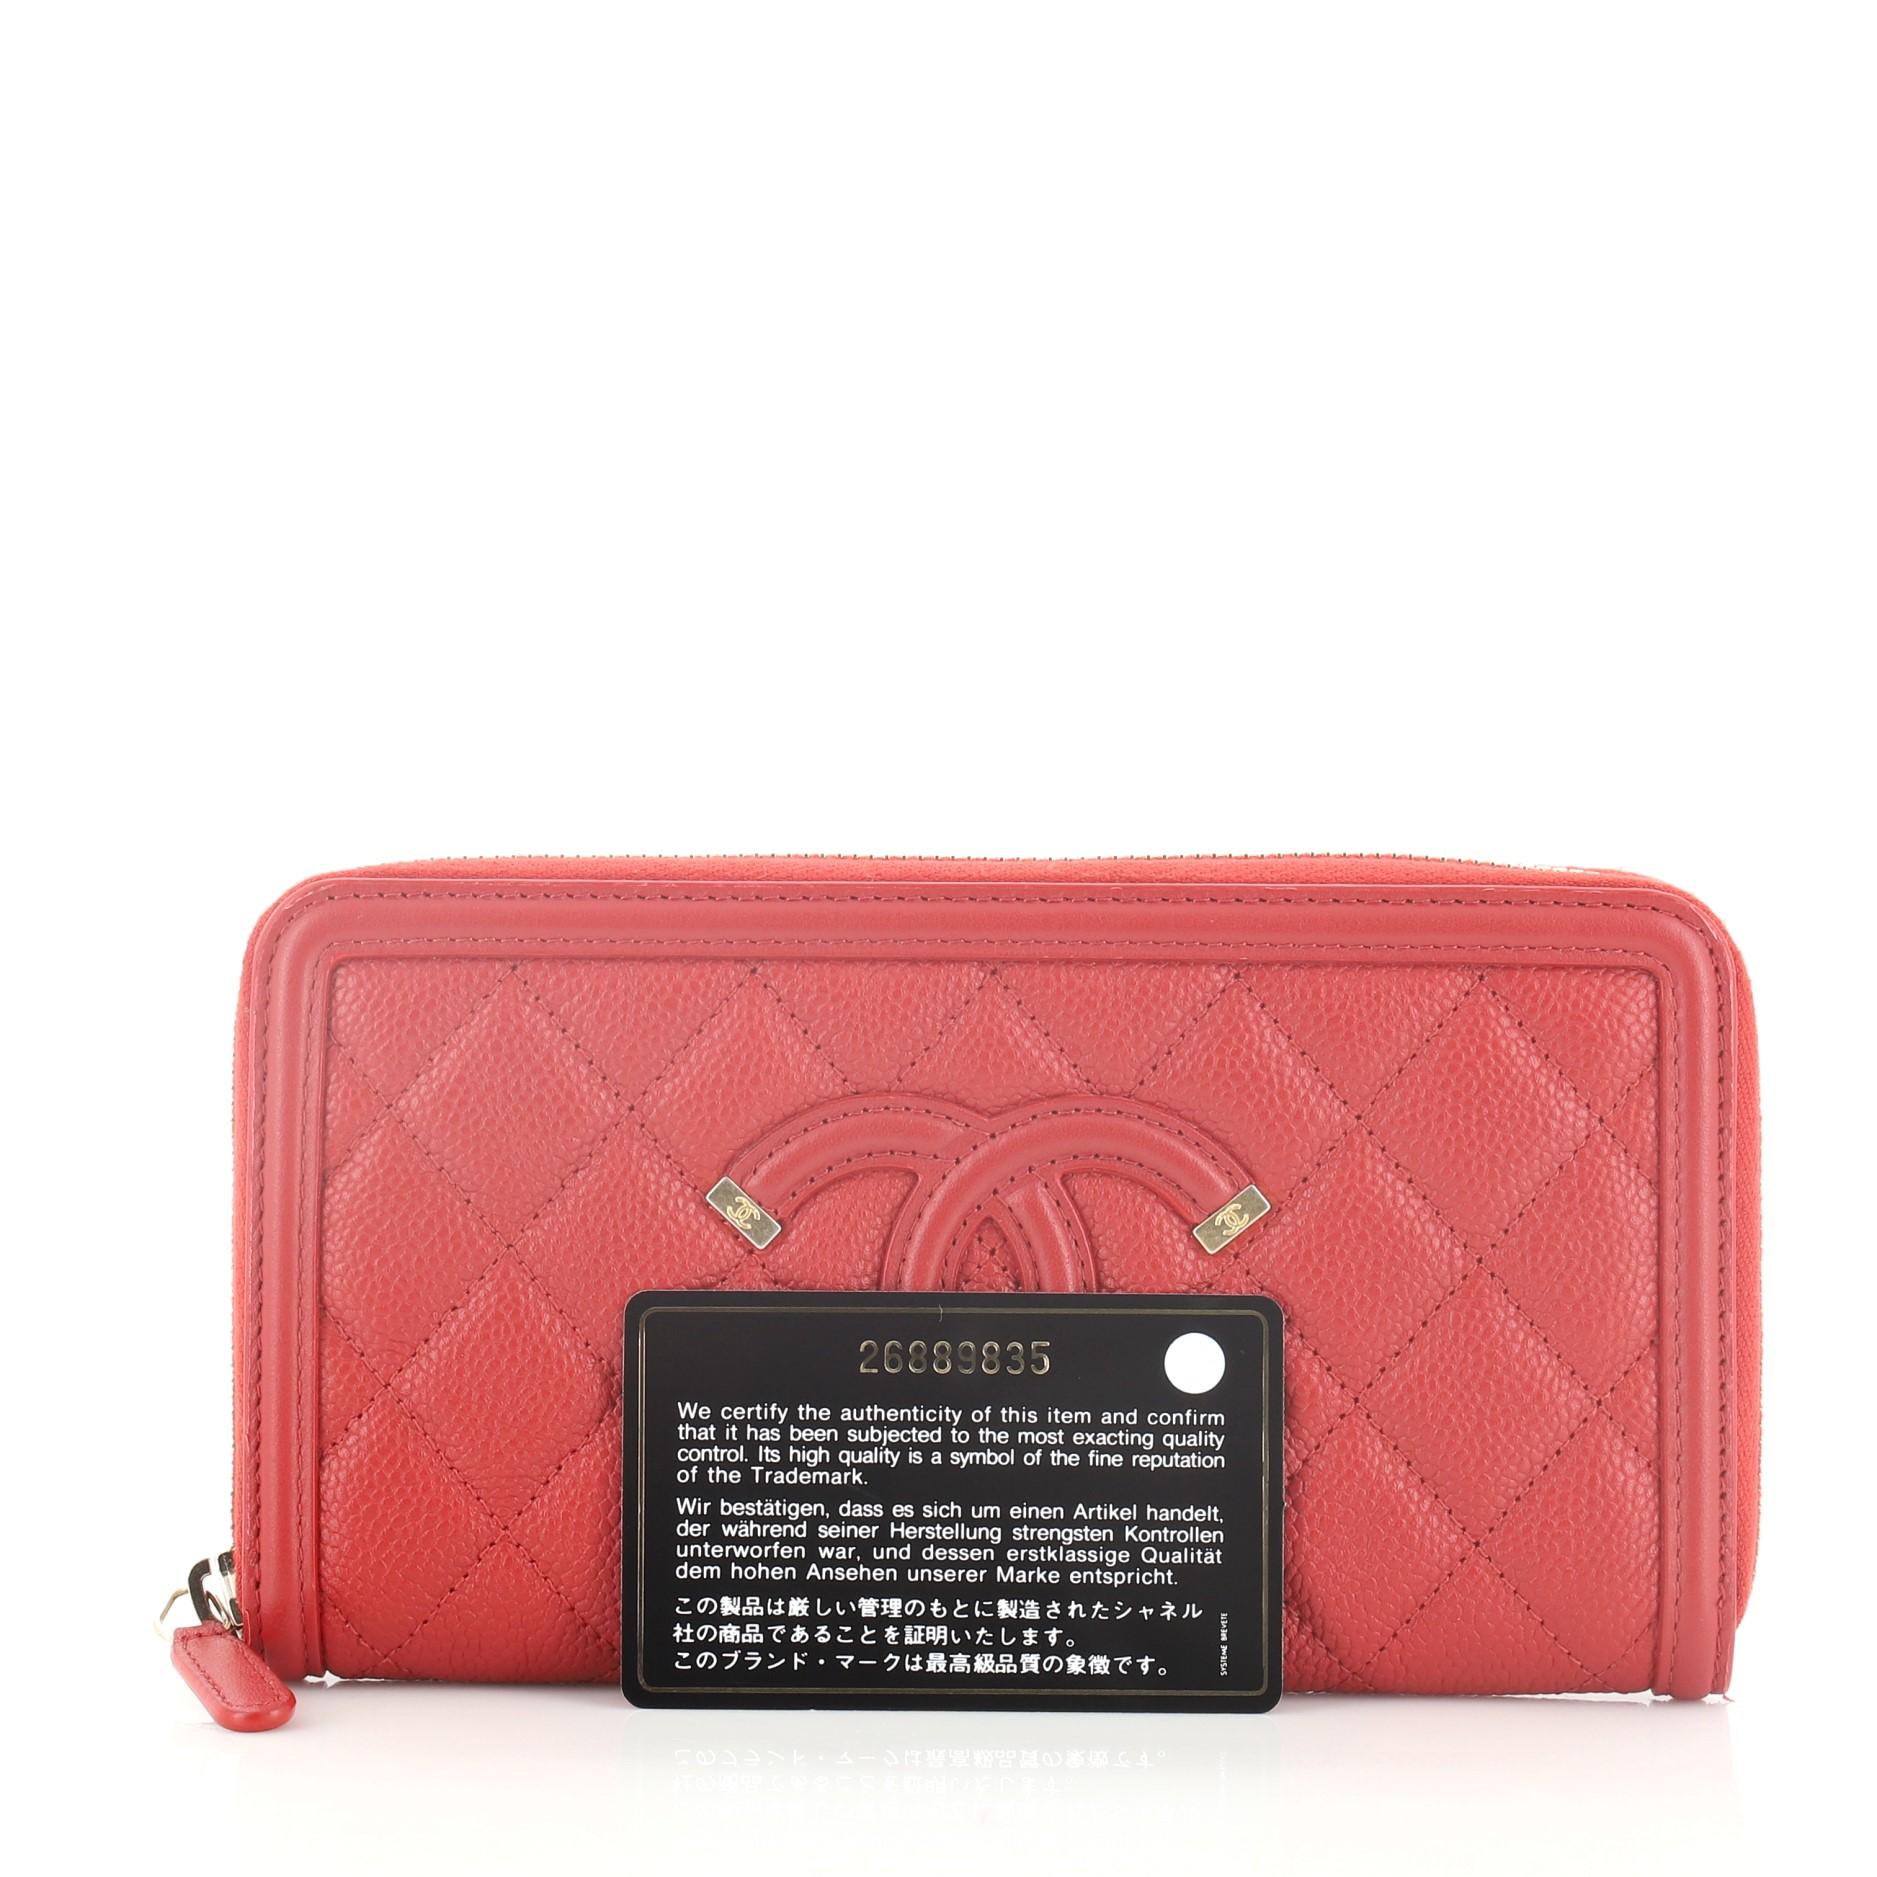 This Chanel Filigree Zip Around Wallet Quilted Caviar Long, crafted in red quilted caviar leather, features Chanel CC logo patch on the front and gold-tone hardware. Its zip around closure opens to a red leather interior with multiple card slots and